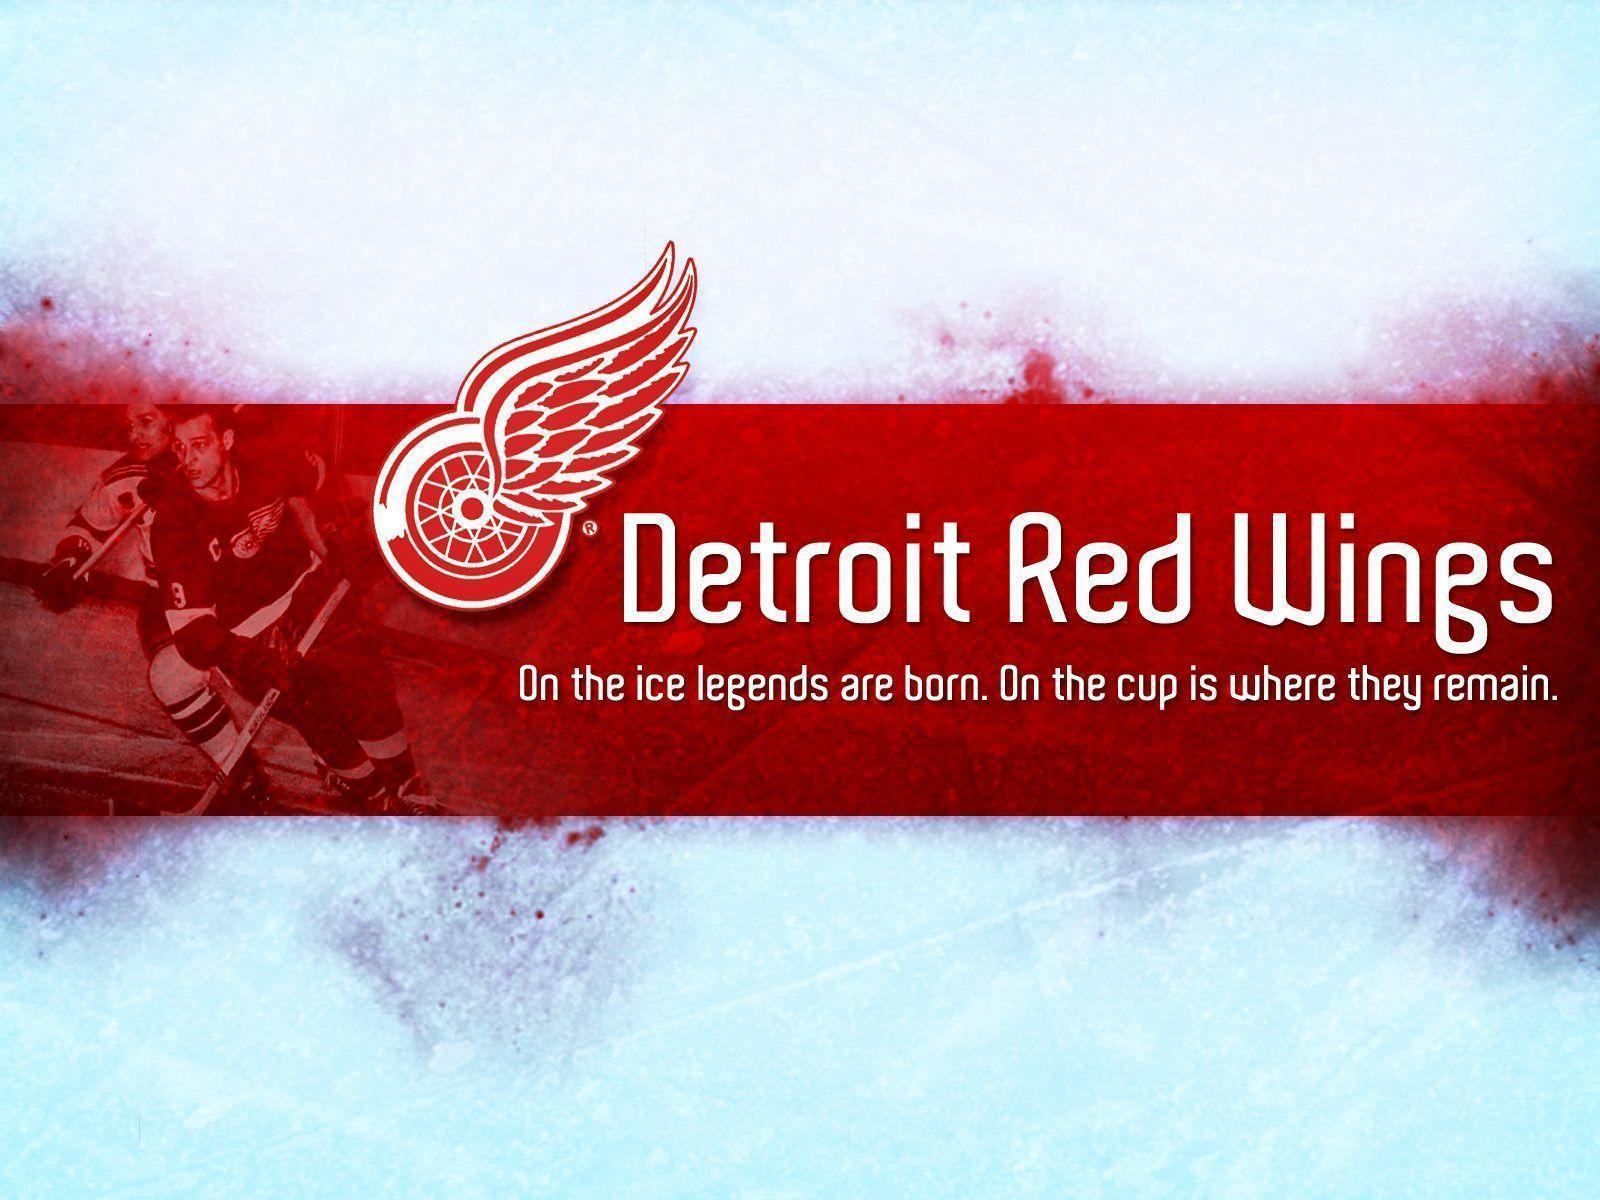 Detroit Red Wings background. Detroit Red Wings wallpaper